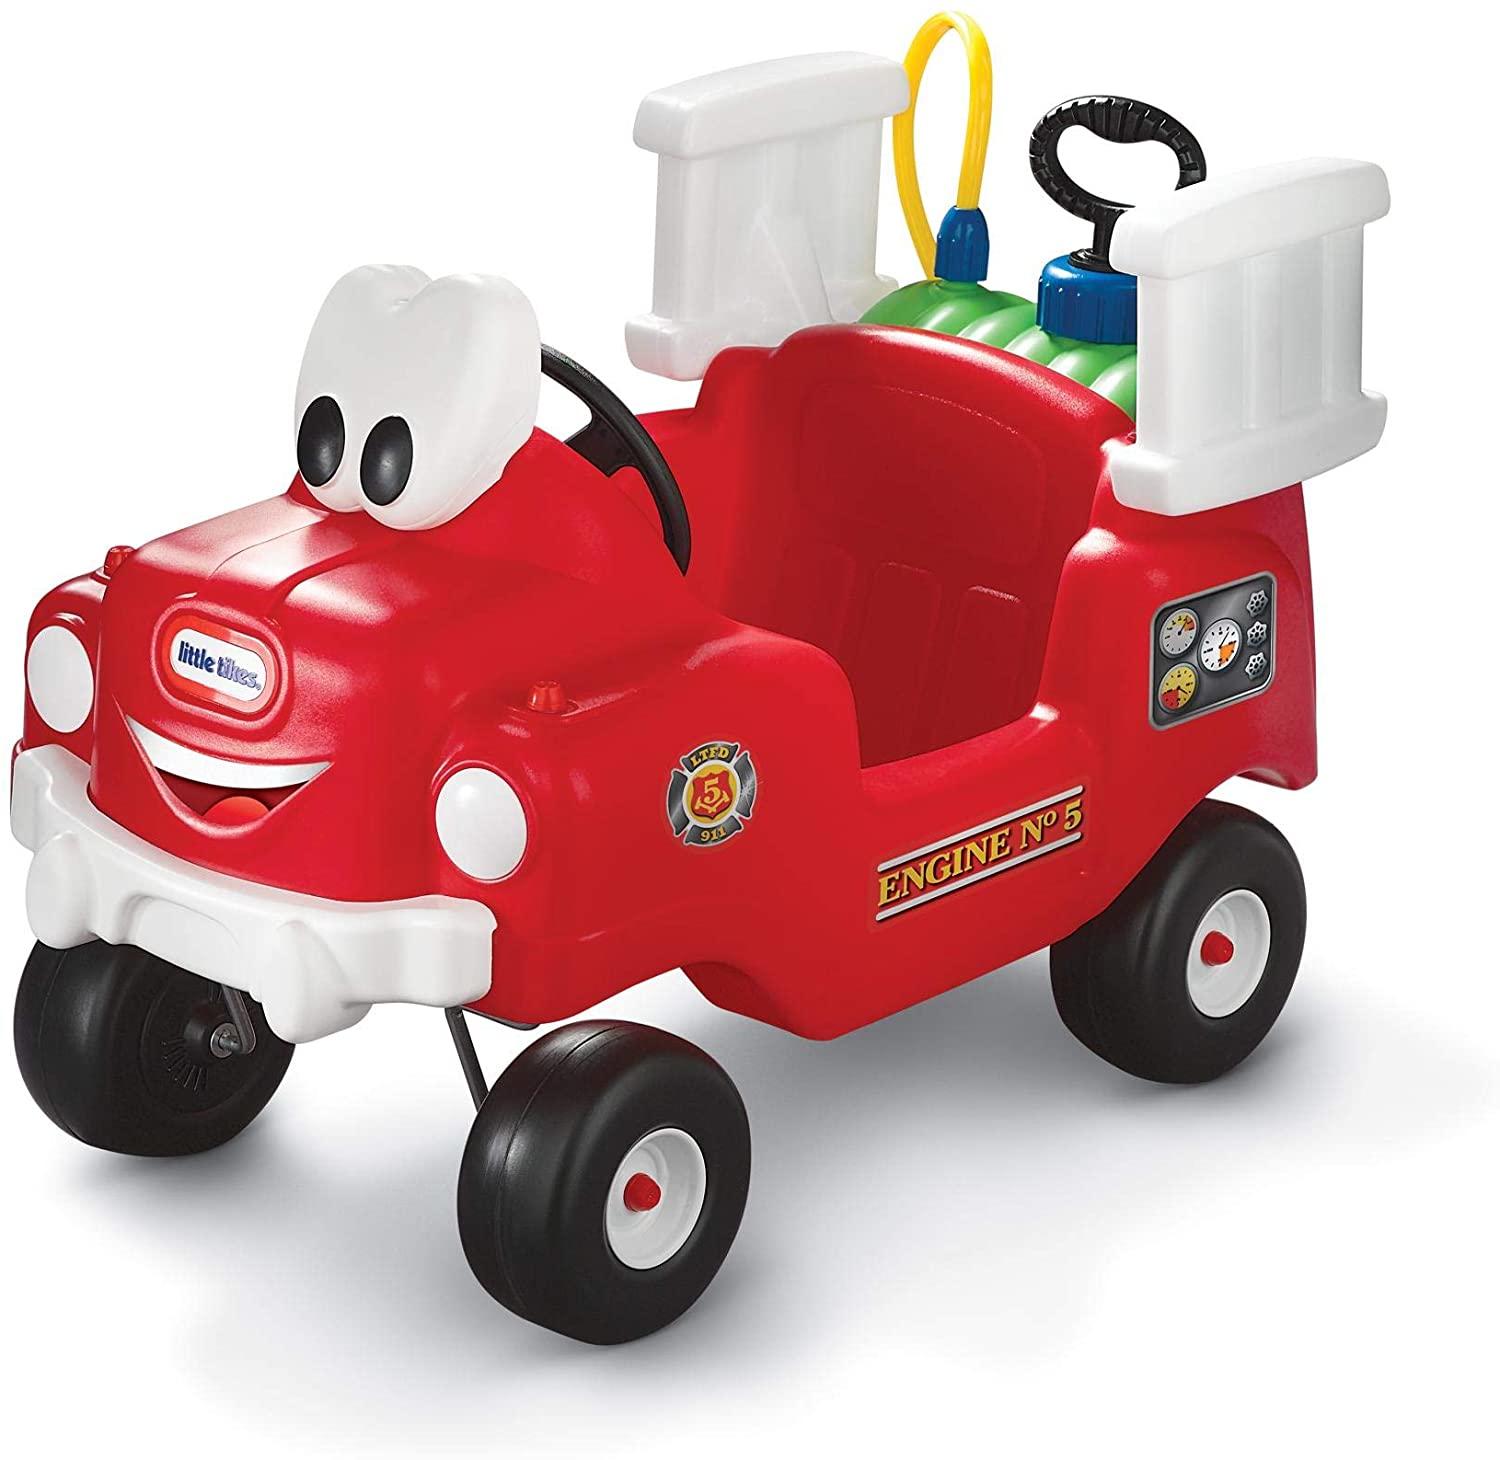 Little Tikes Cozy Spray and Rescue Fire Truck Toymaster Ballina